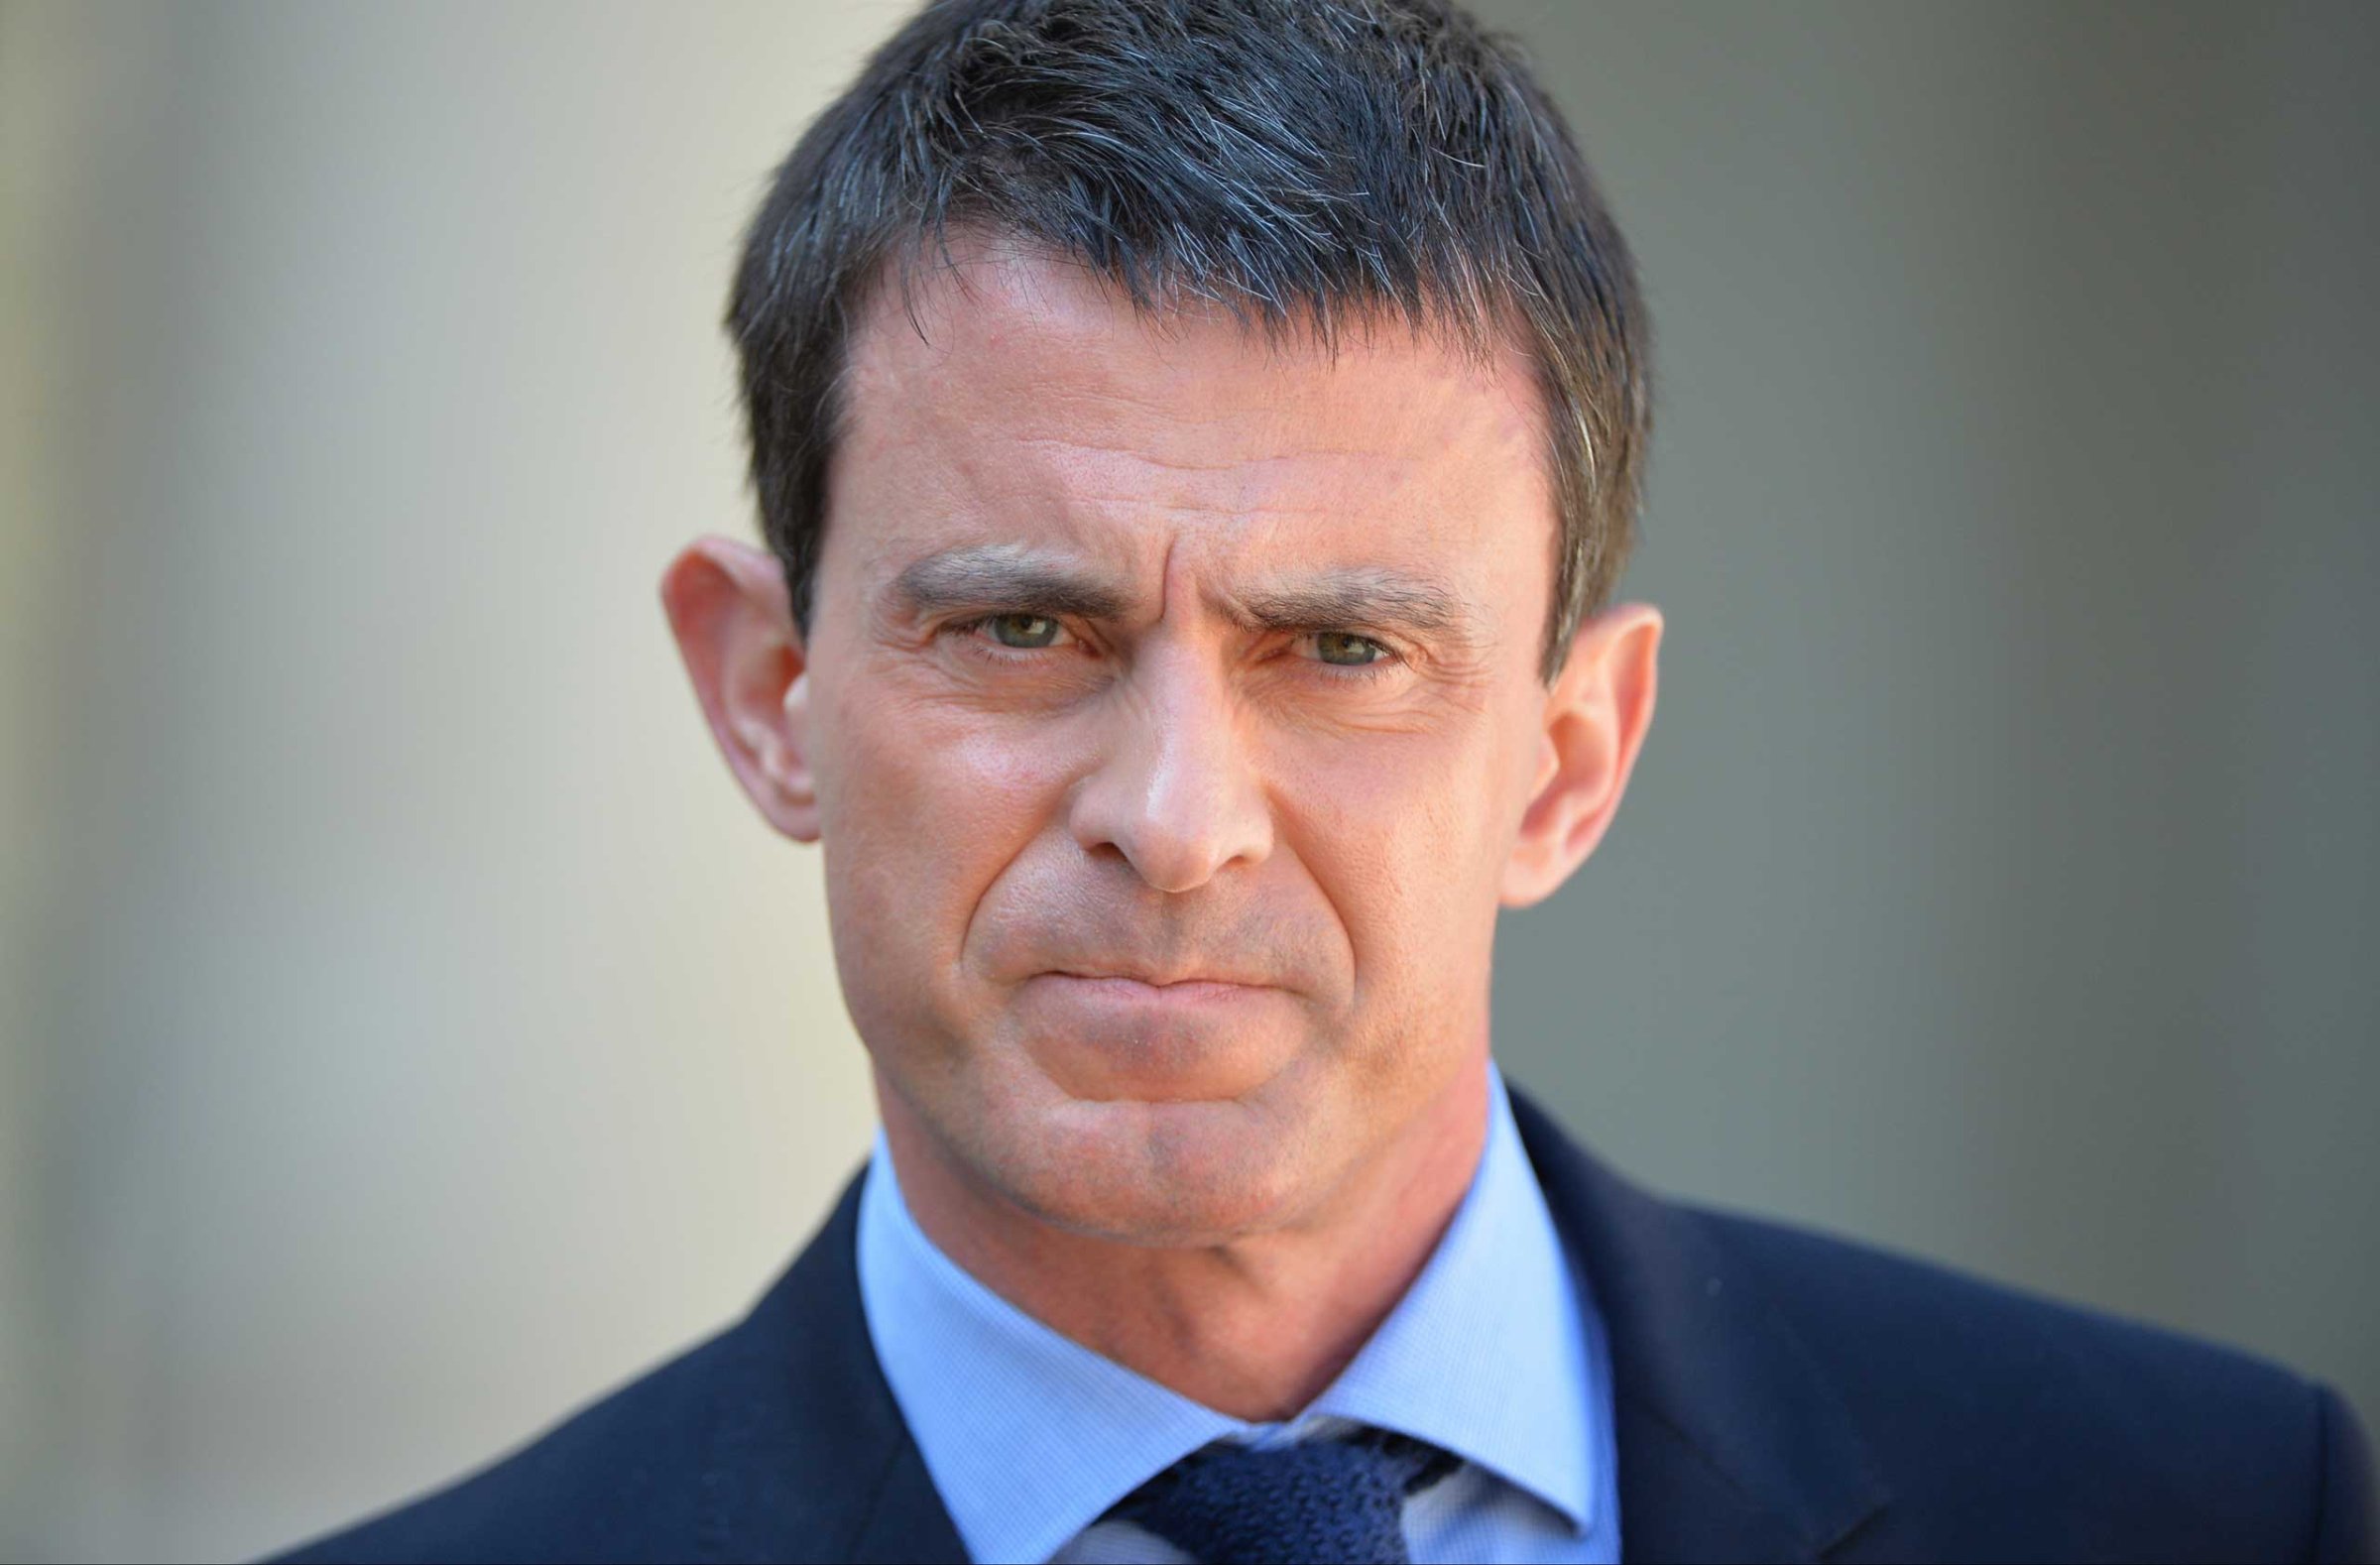 French Prime Minister Manuel Valls makes a statement following the weekly cabinet meeting at the Elysee Palace in Paris on April 22, 2015.